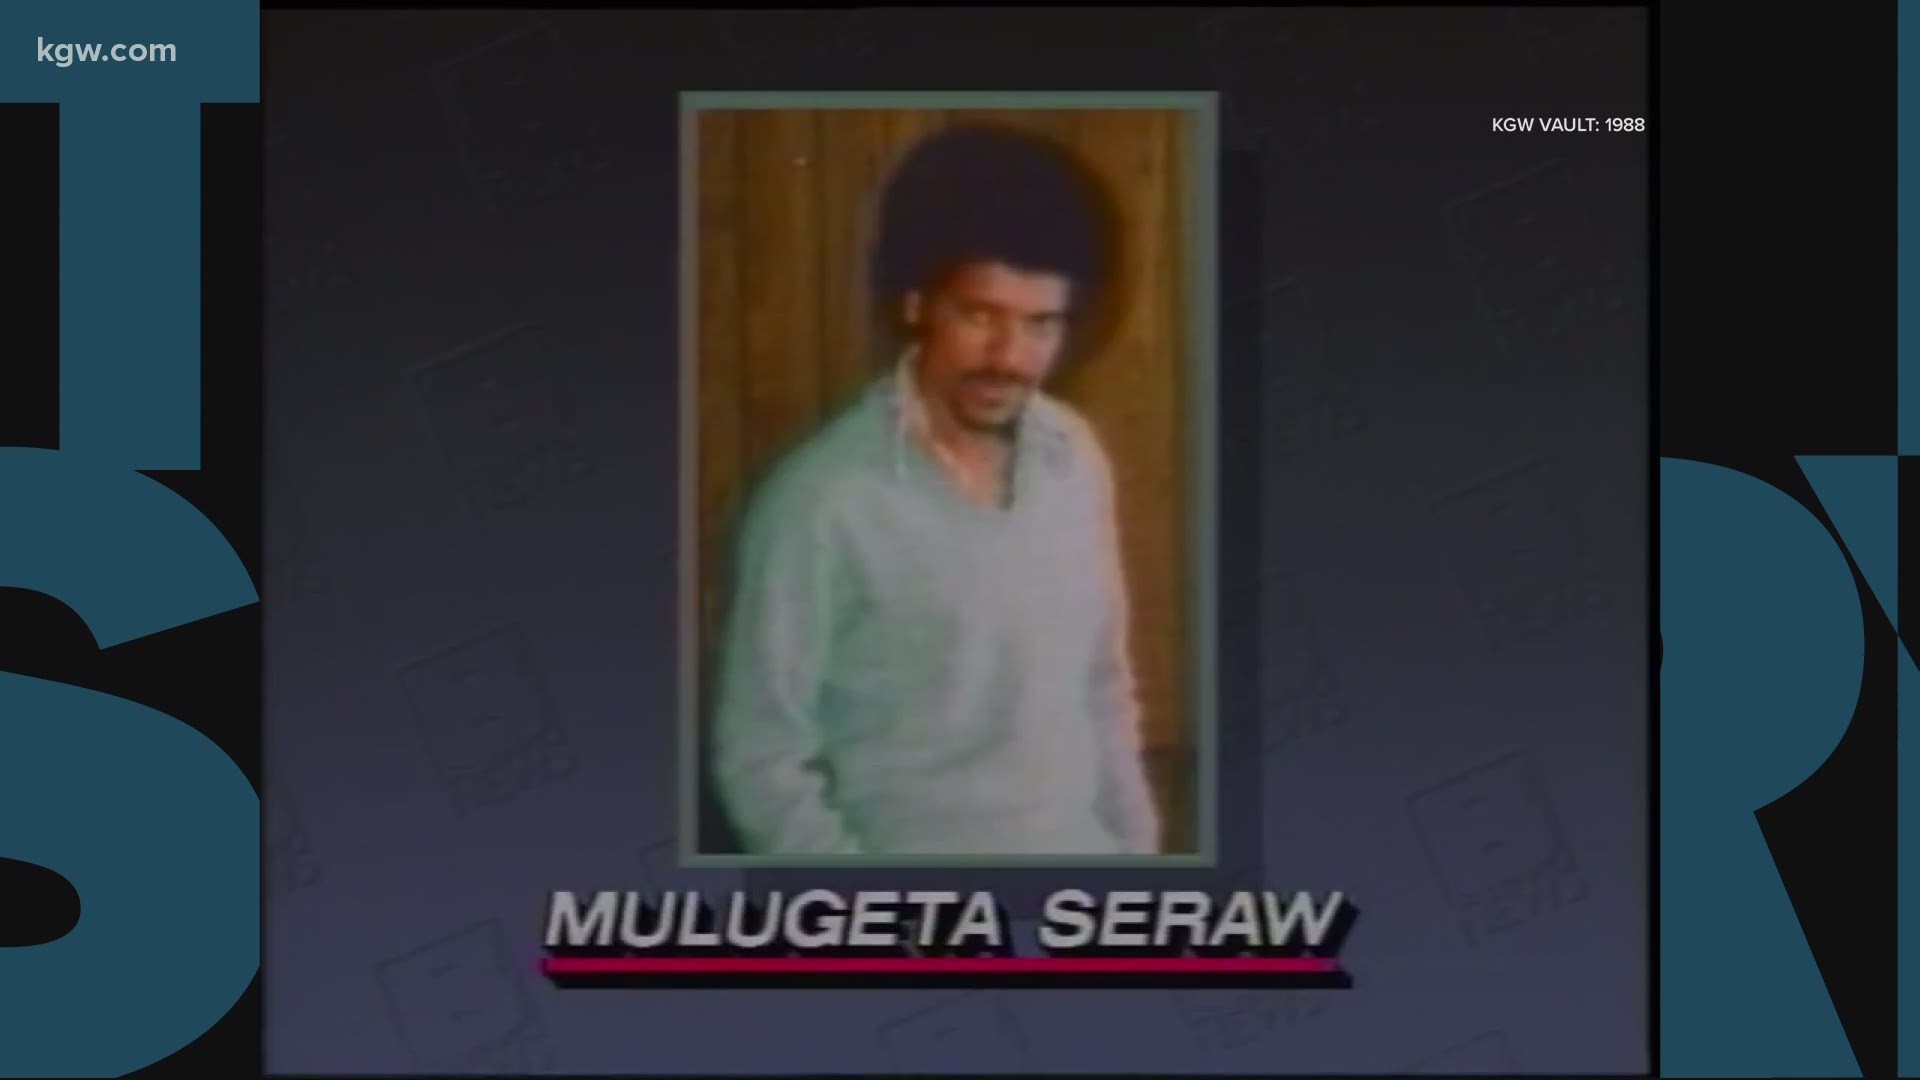 The hate crime put a spotlight on white supremacists in the Northwest. 30 years later Portland added Mulugeta Seraw's name to street signs in the Kerns neighborhood.